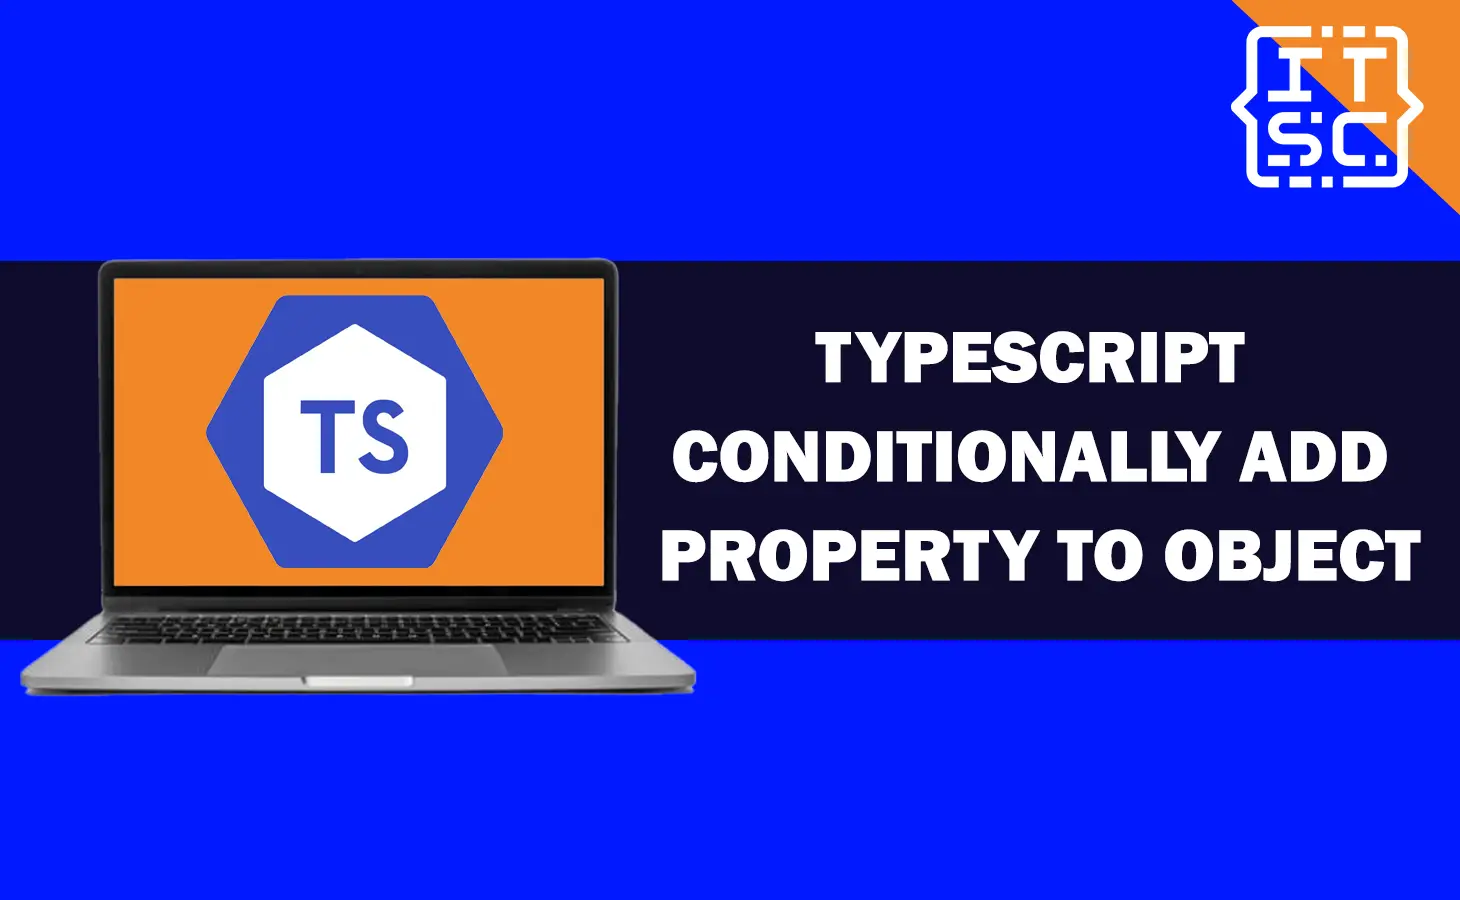 TypeScript Conditionally Add Property to Object